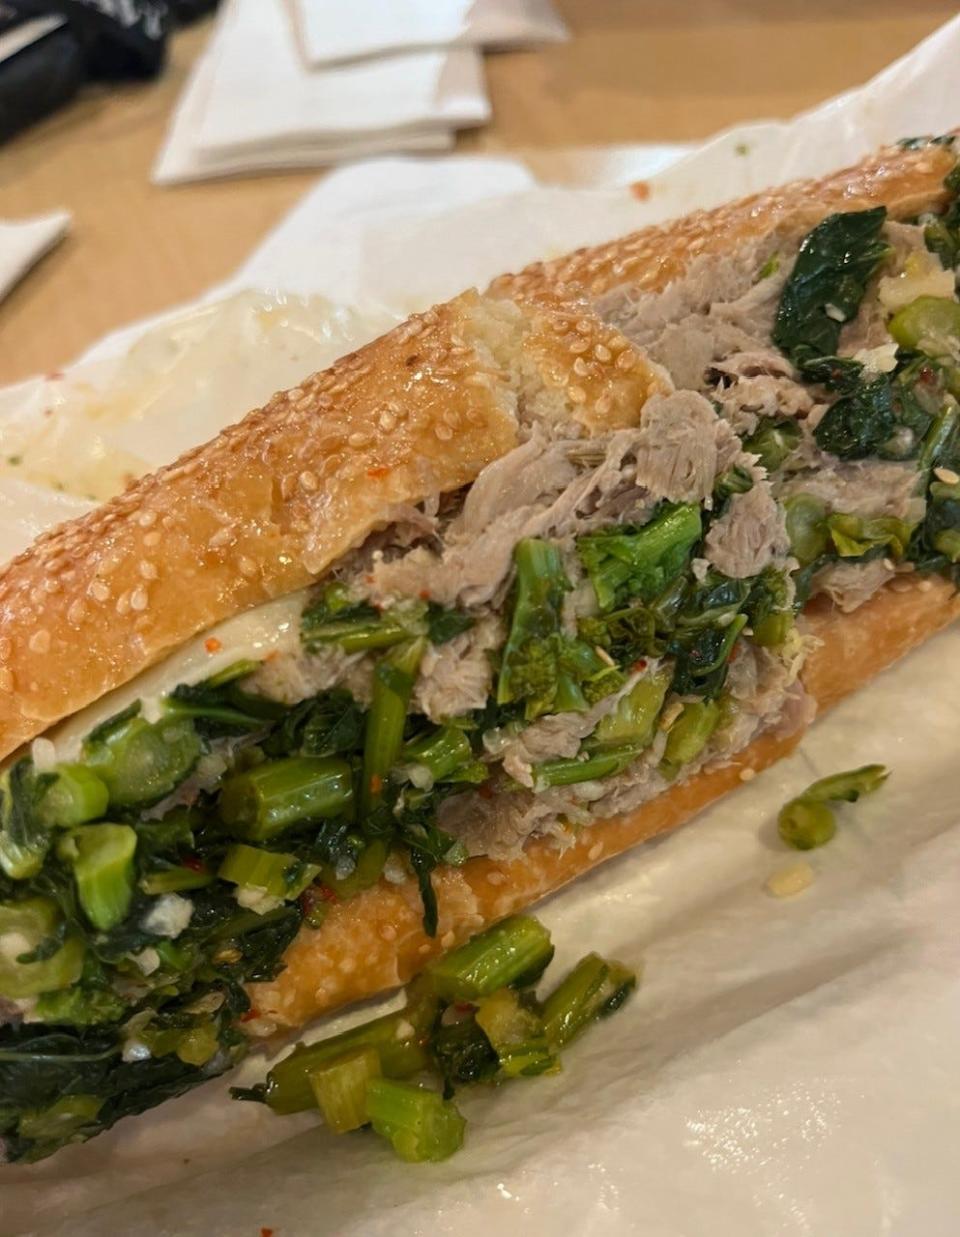 Don't overlook the pork at Wario's Beef and Pork in the Arena District. The roasted pork sandwich includes chopped broccoli rabe and provolone cheese.